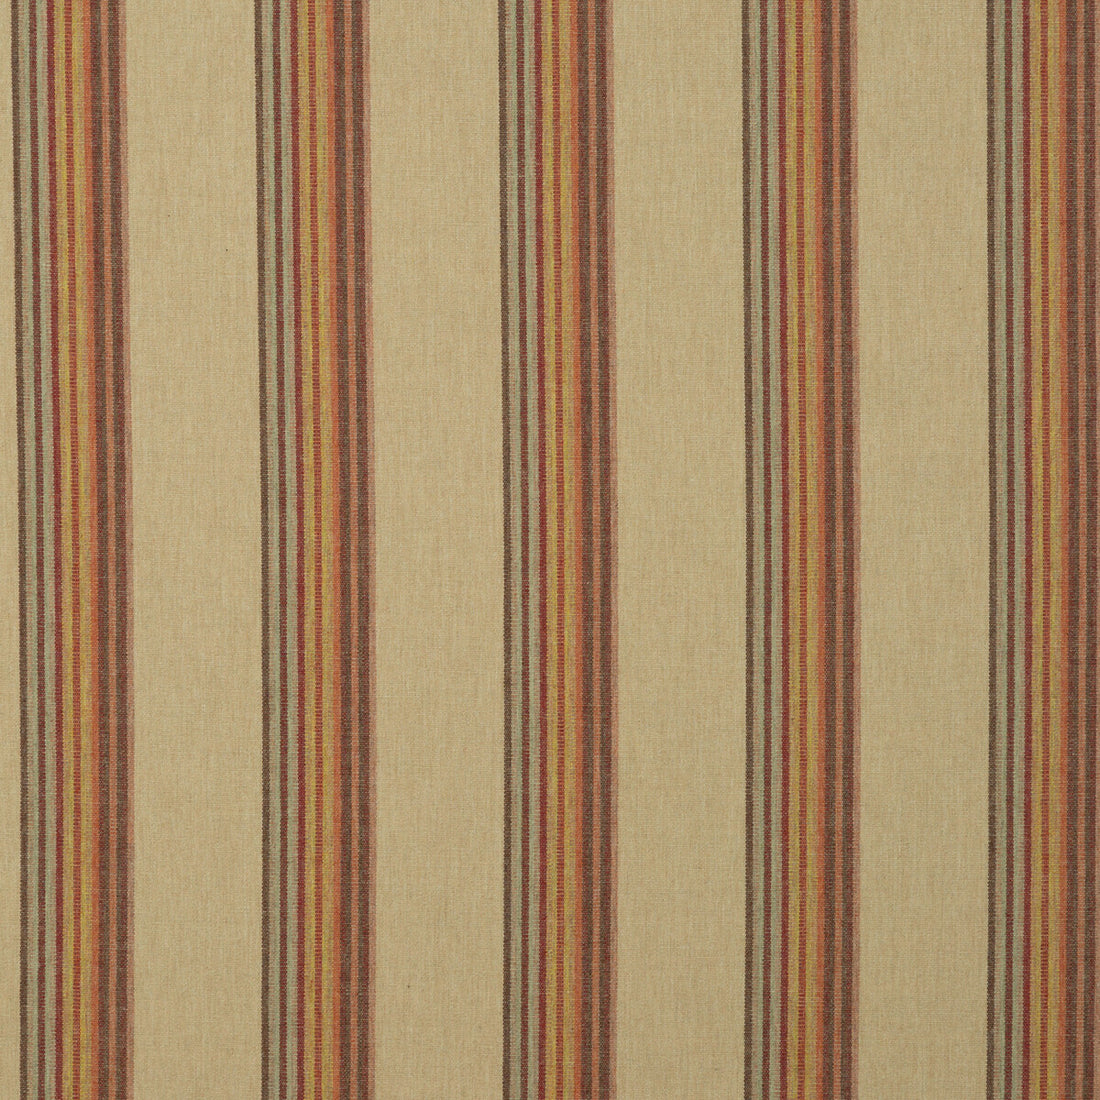 Twelve Bar Stripe fabric in sand/rose color - pattern FD614.N107.0 - by Mulberry in the Counterpoint collection